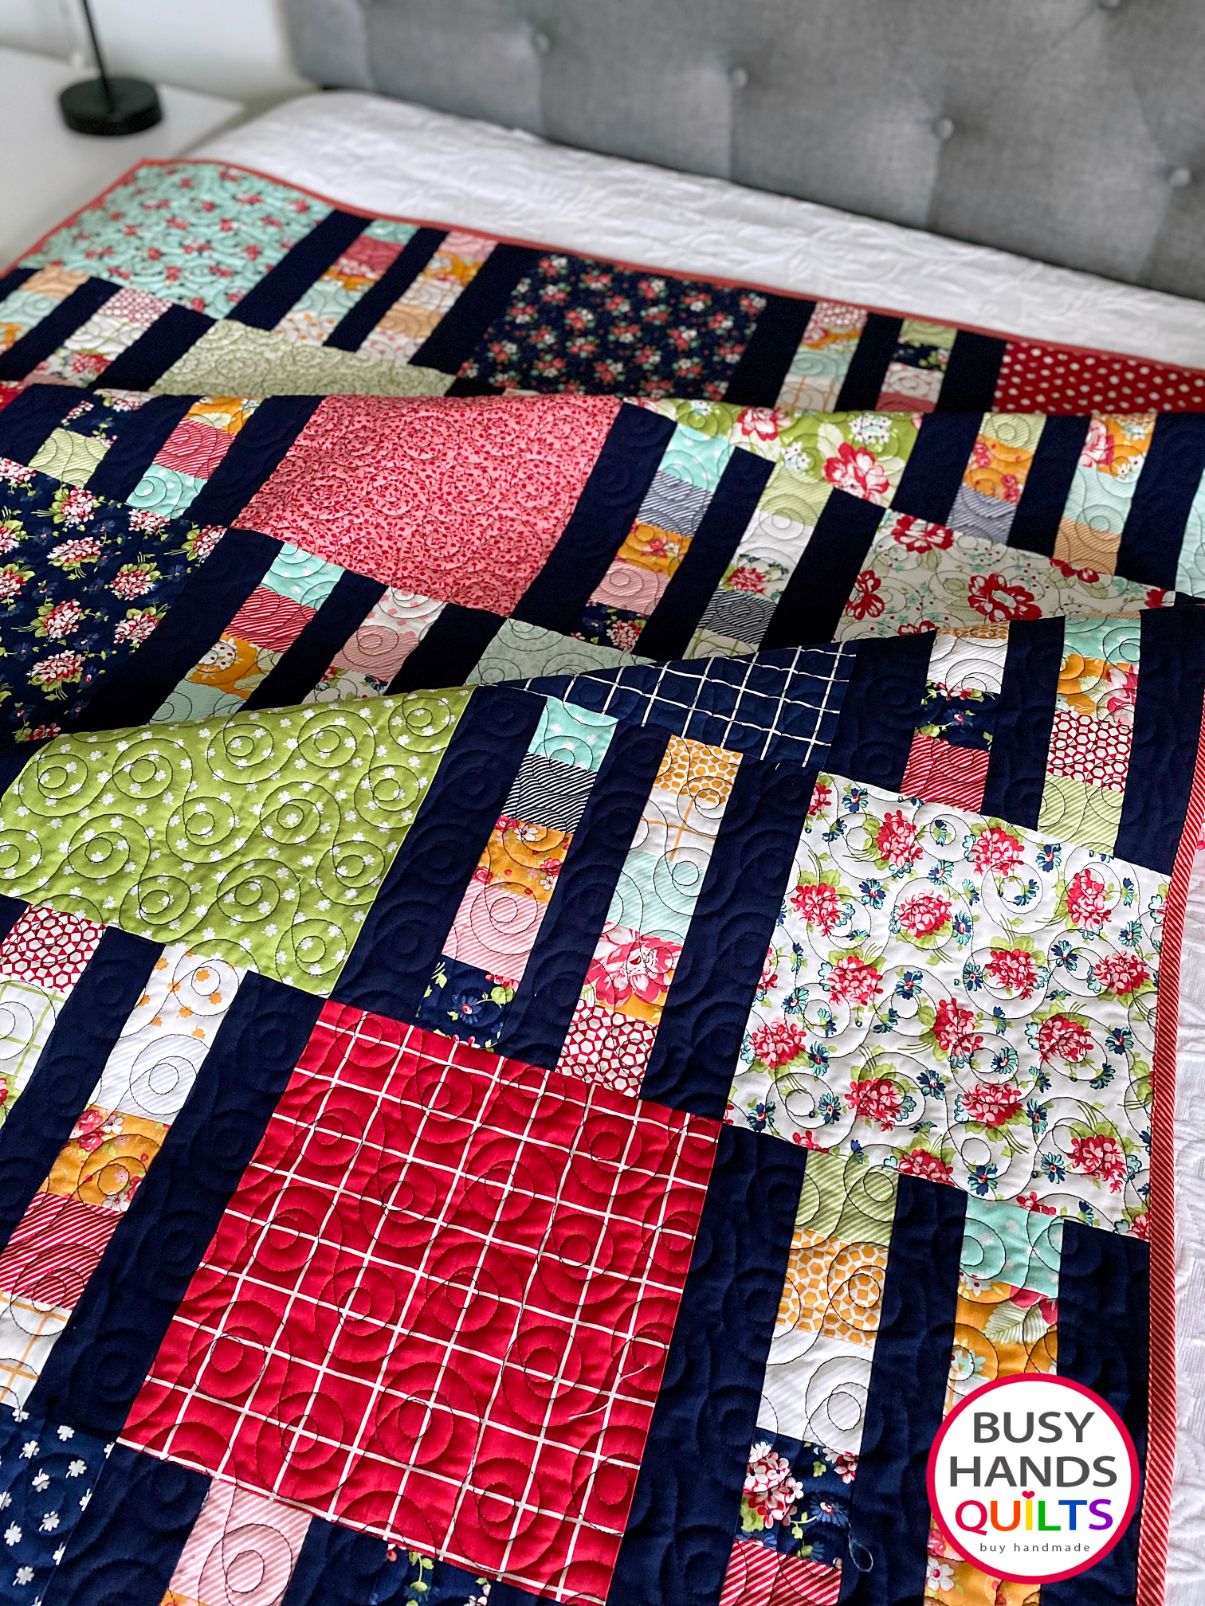 Custom Handmade Picket Fence Rectangular Throw Quilt in One Fine Day - Ready to Ship Busy Hands Quilts $349